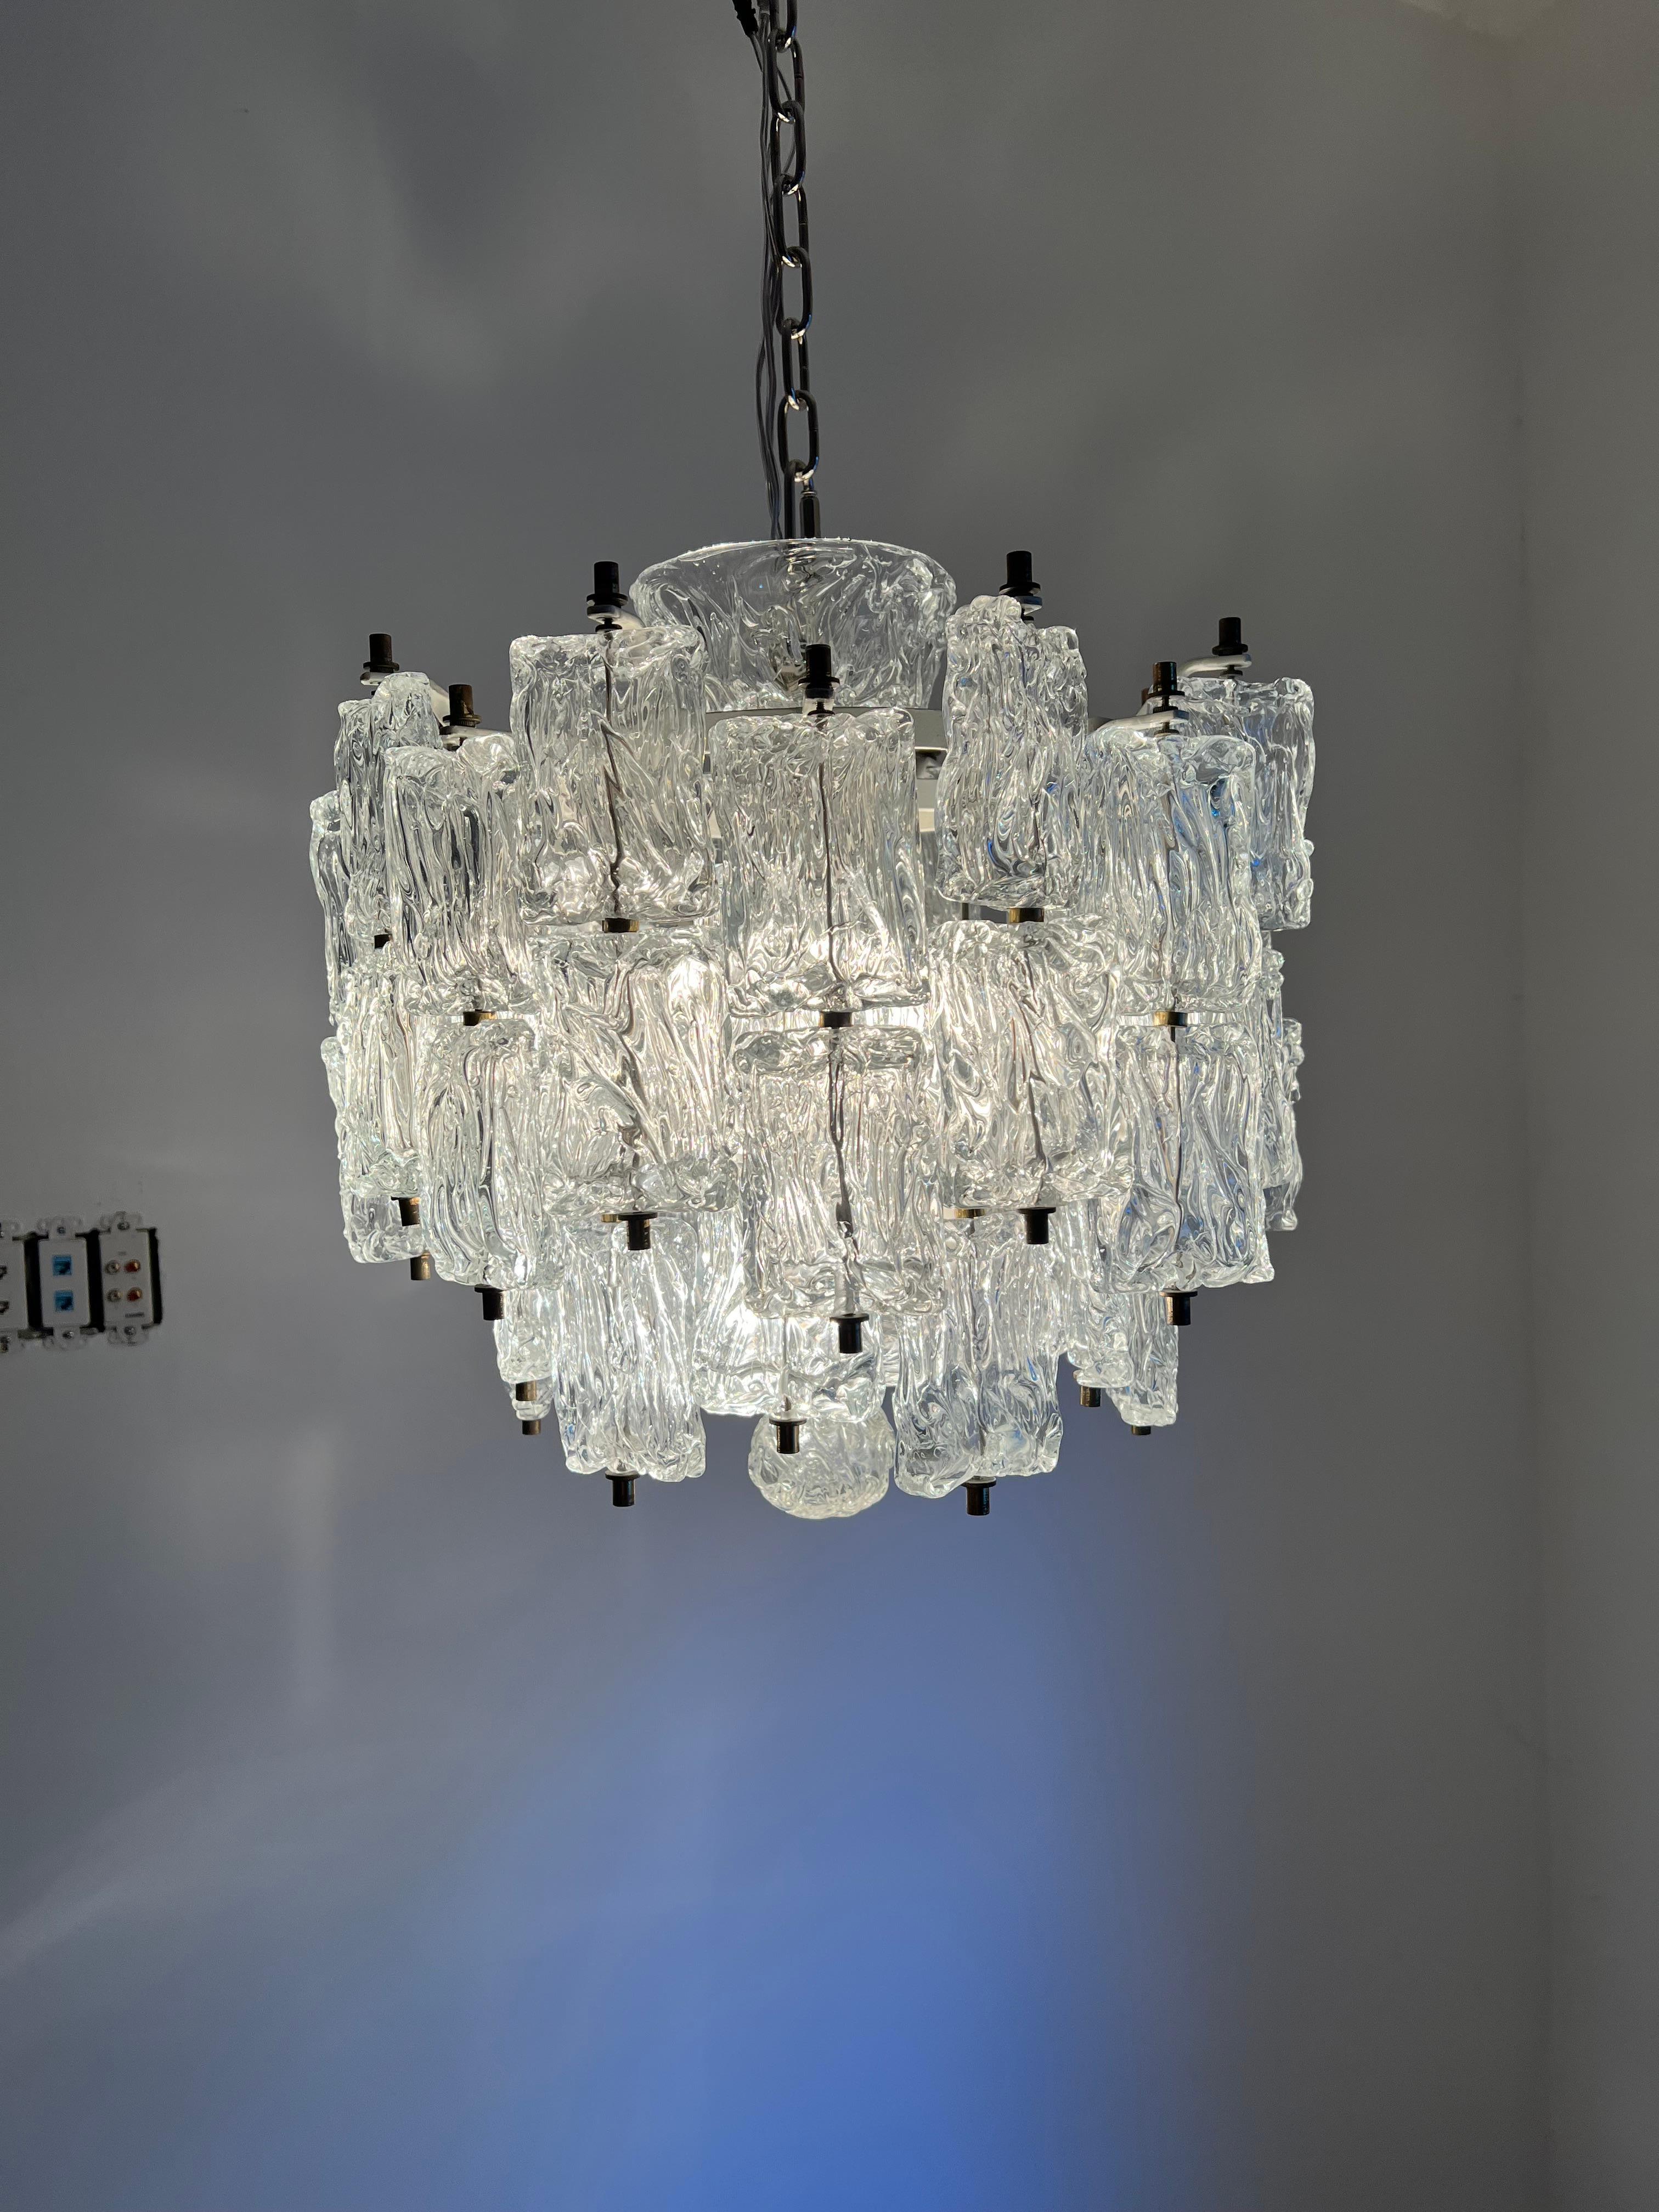 Art Deco chandelier manufactured in hand blown Murano glass to Barovier e Toso, Murano Italy circa 1950.
Measurement of lantern is 27cm H by 18 cm W. 6 e27 bulbs.
Chandelier does not include a chain but it can be procured if requested by the